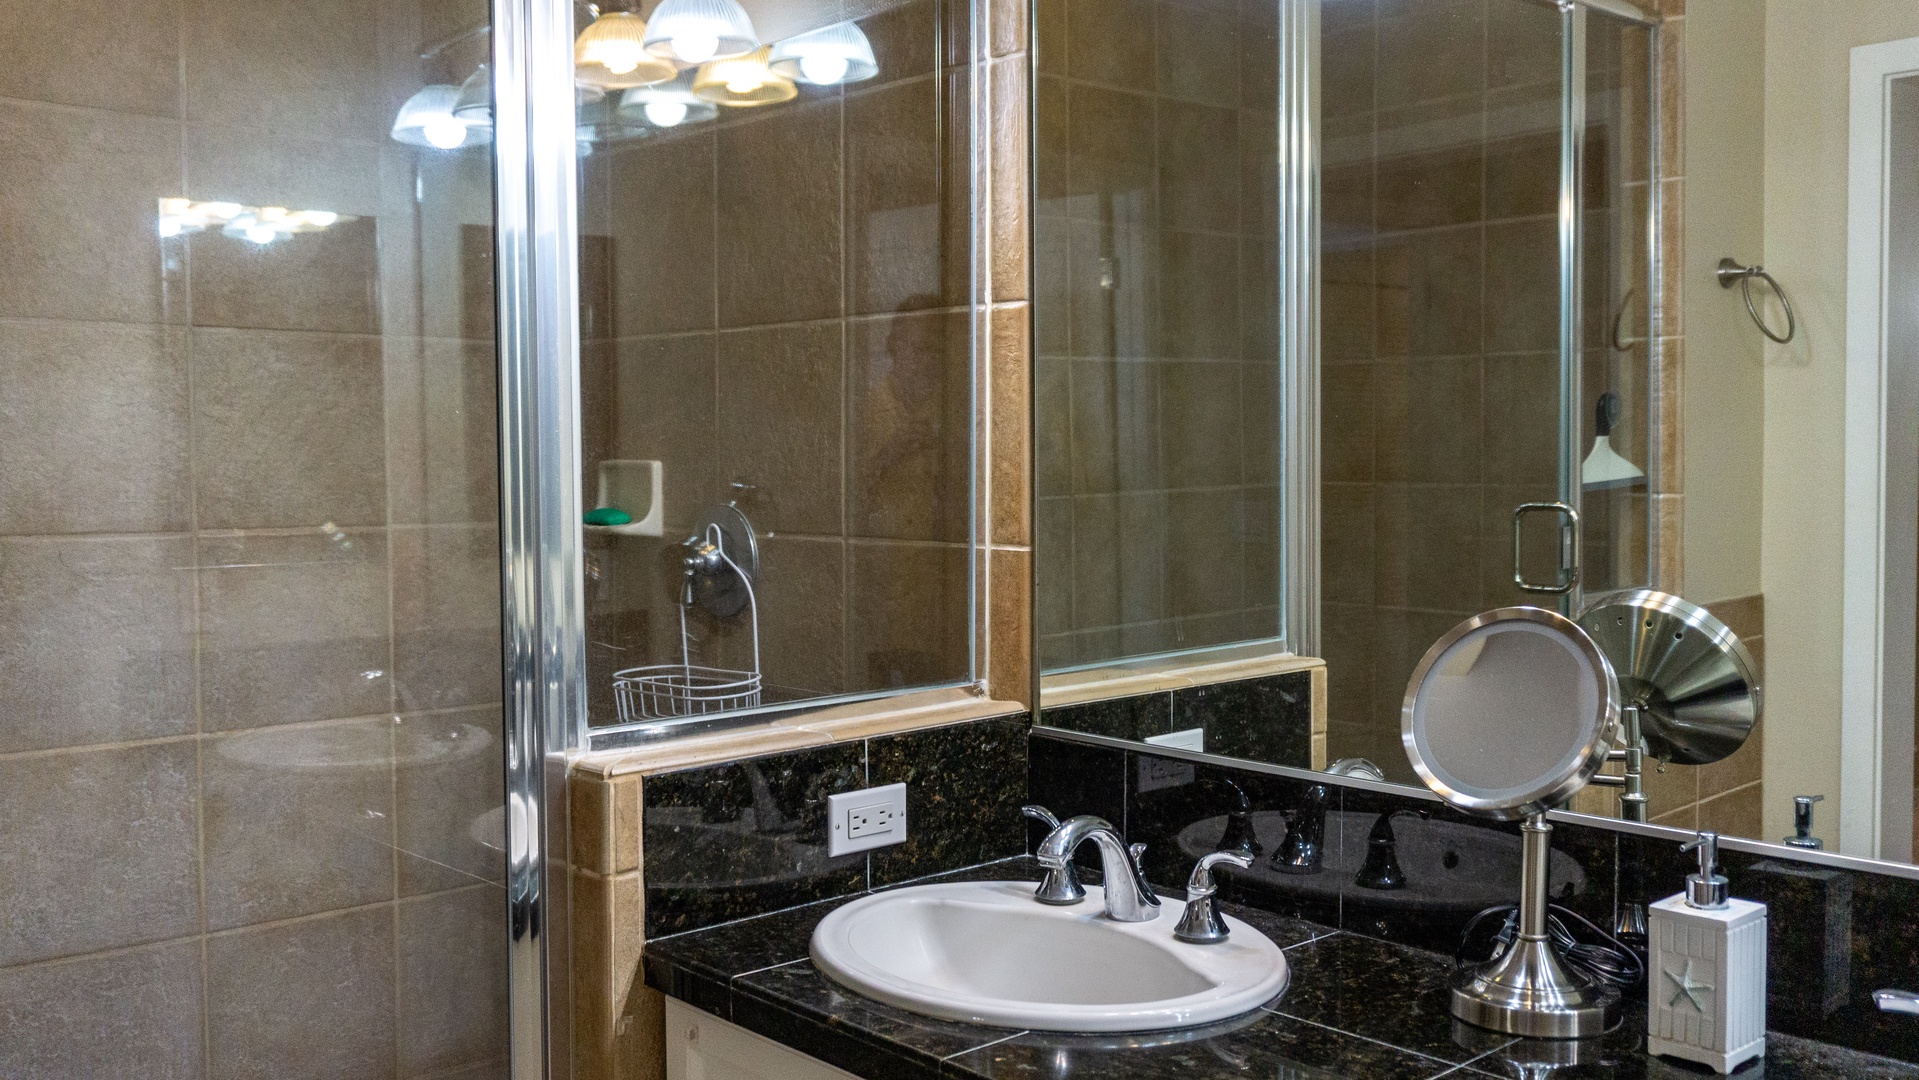 Kapolei Vacation Rentals, Coconut Plantation 1194-3 - The primary guest bathroom with a walk-in shower.